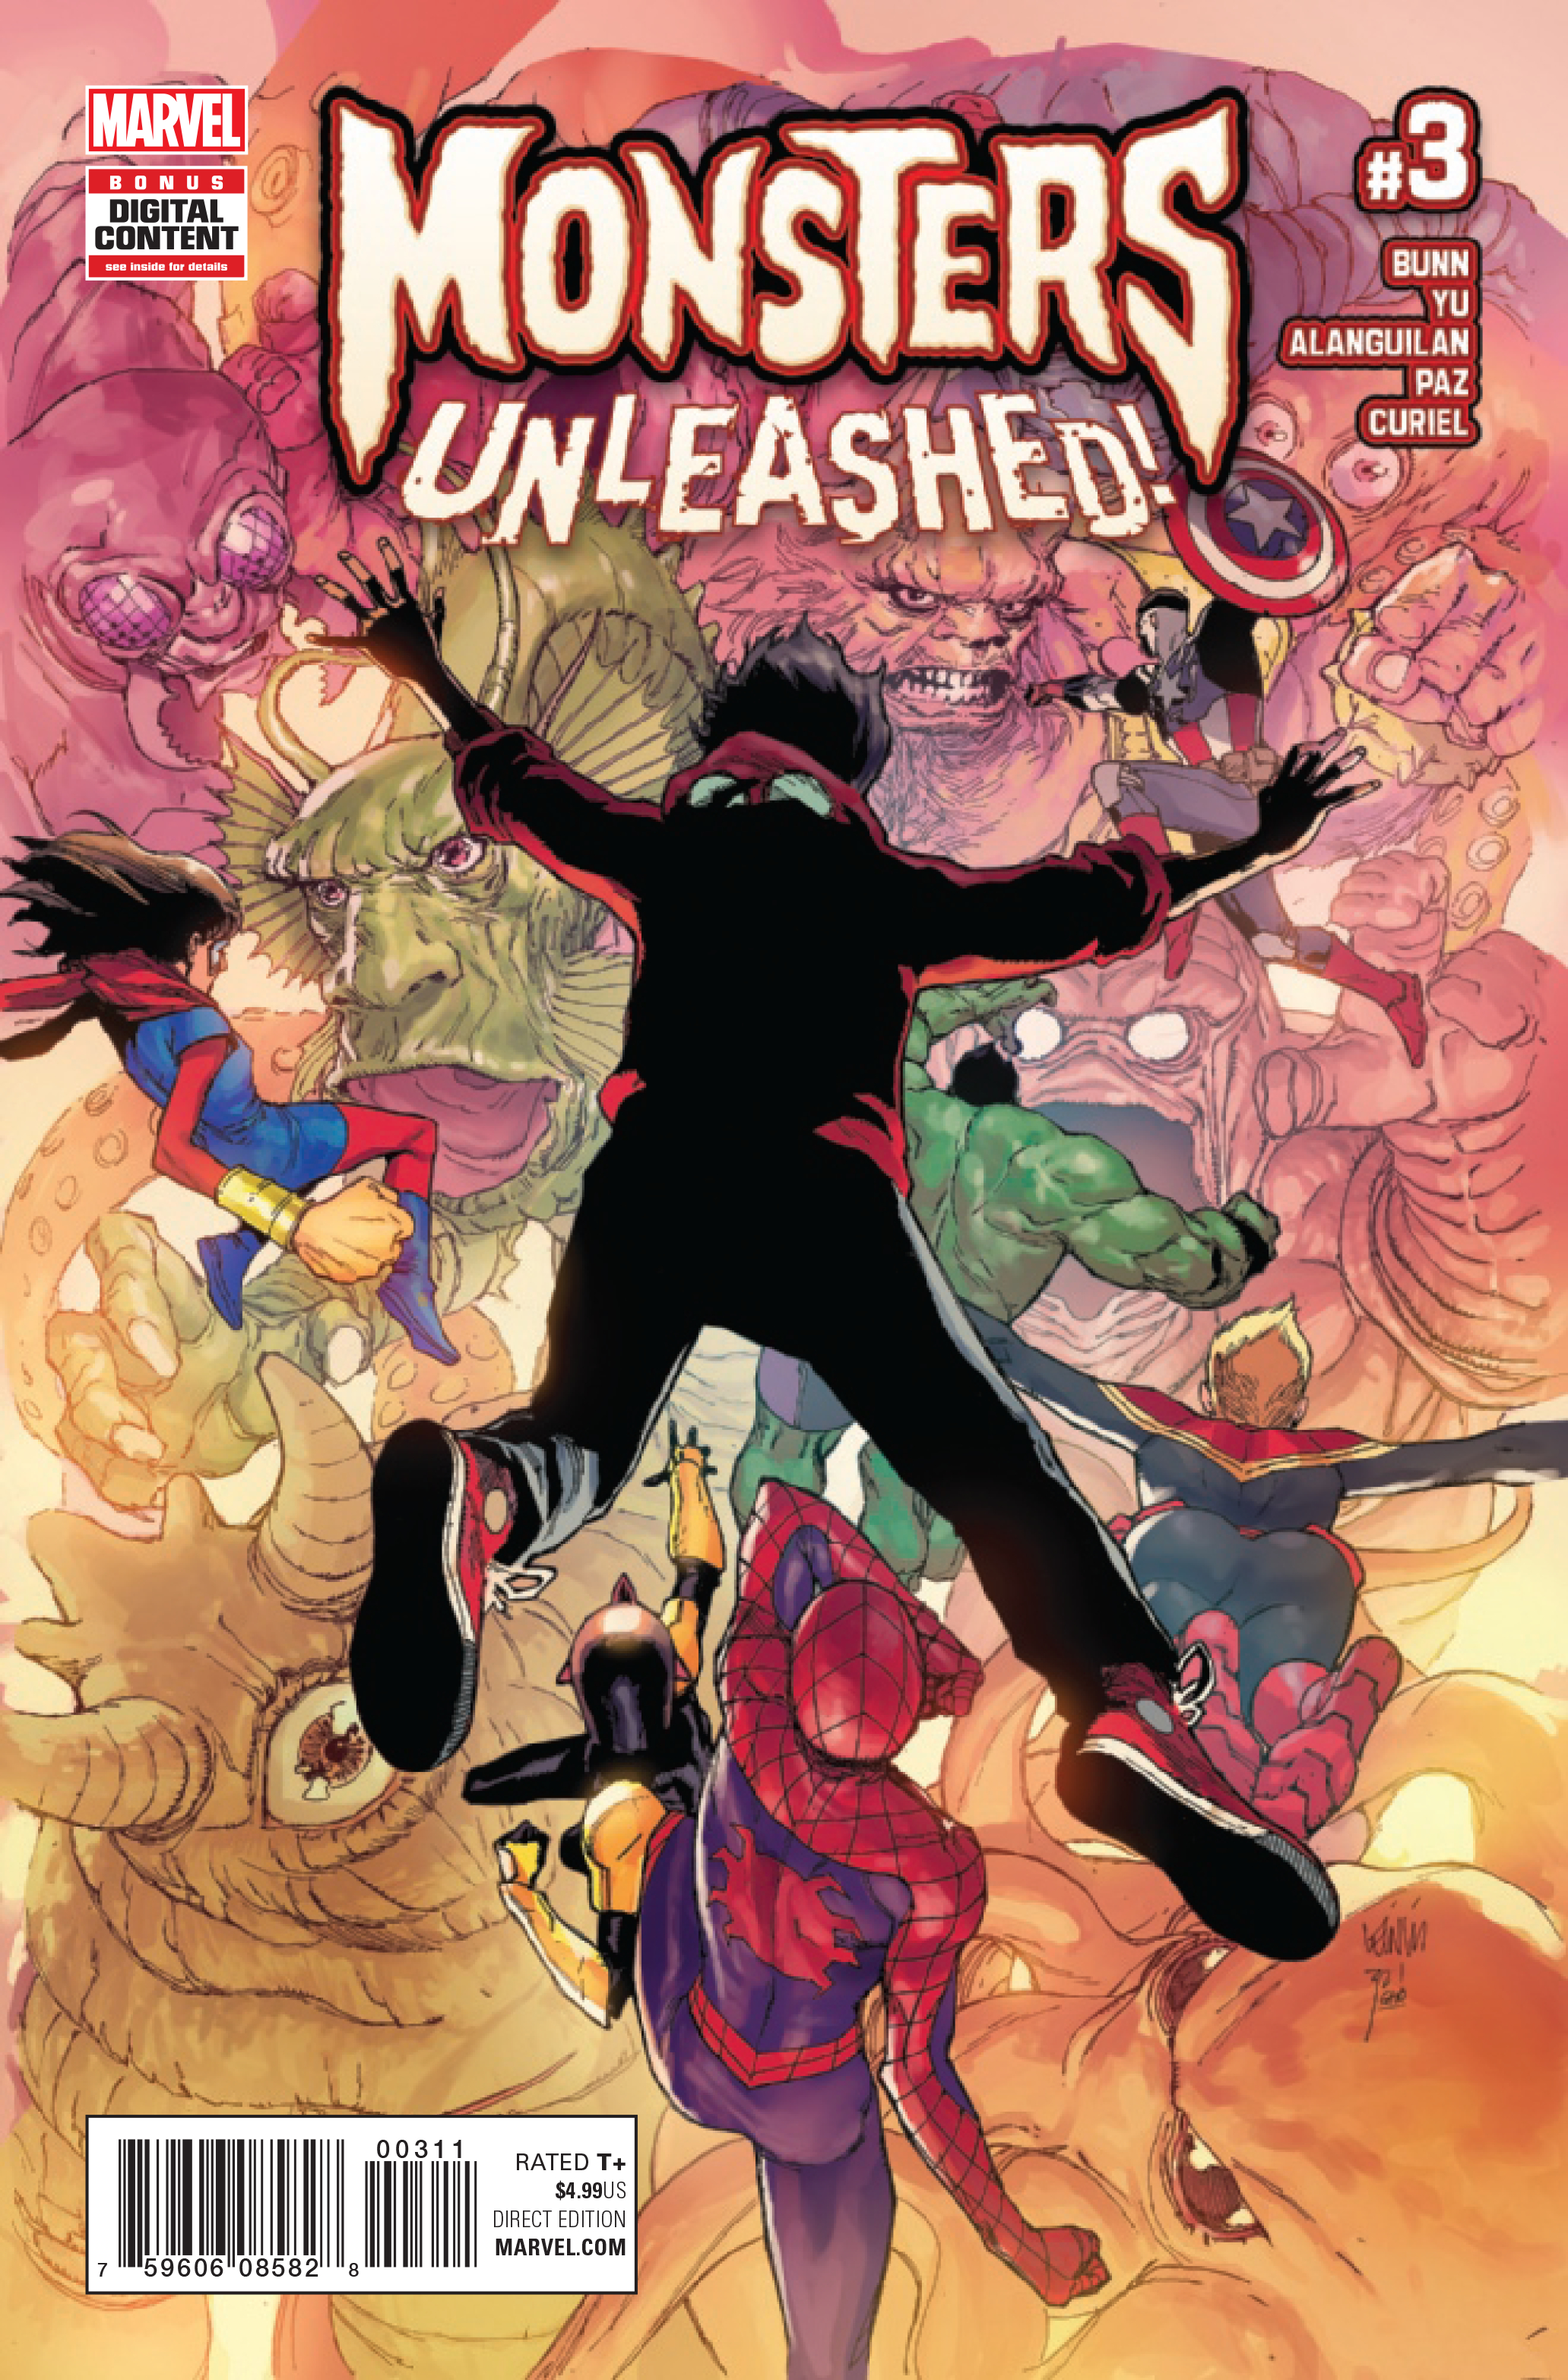 MONSTERS UNLEASHED #3 (OF 5)